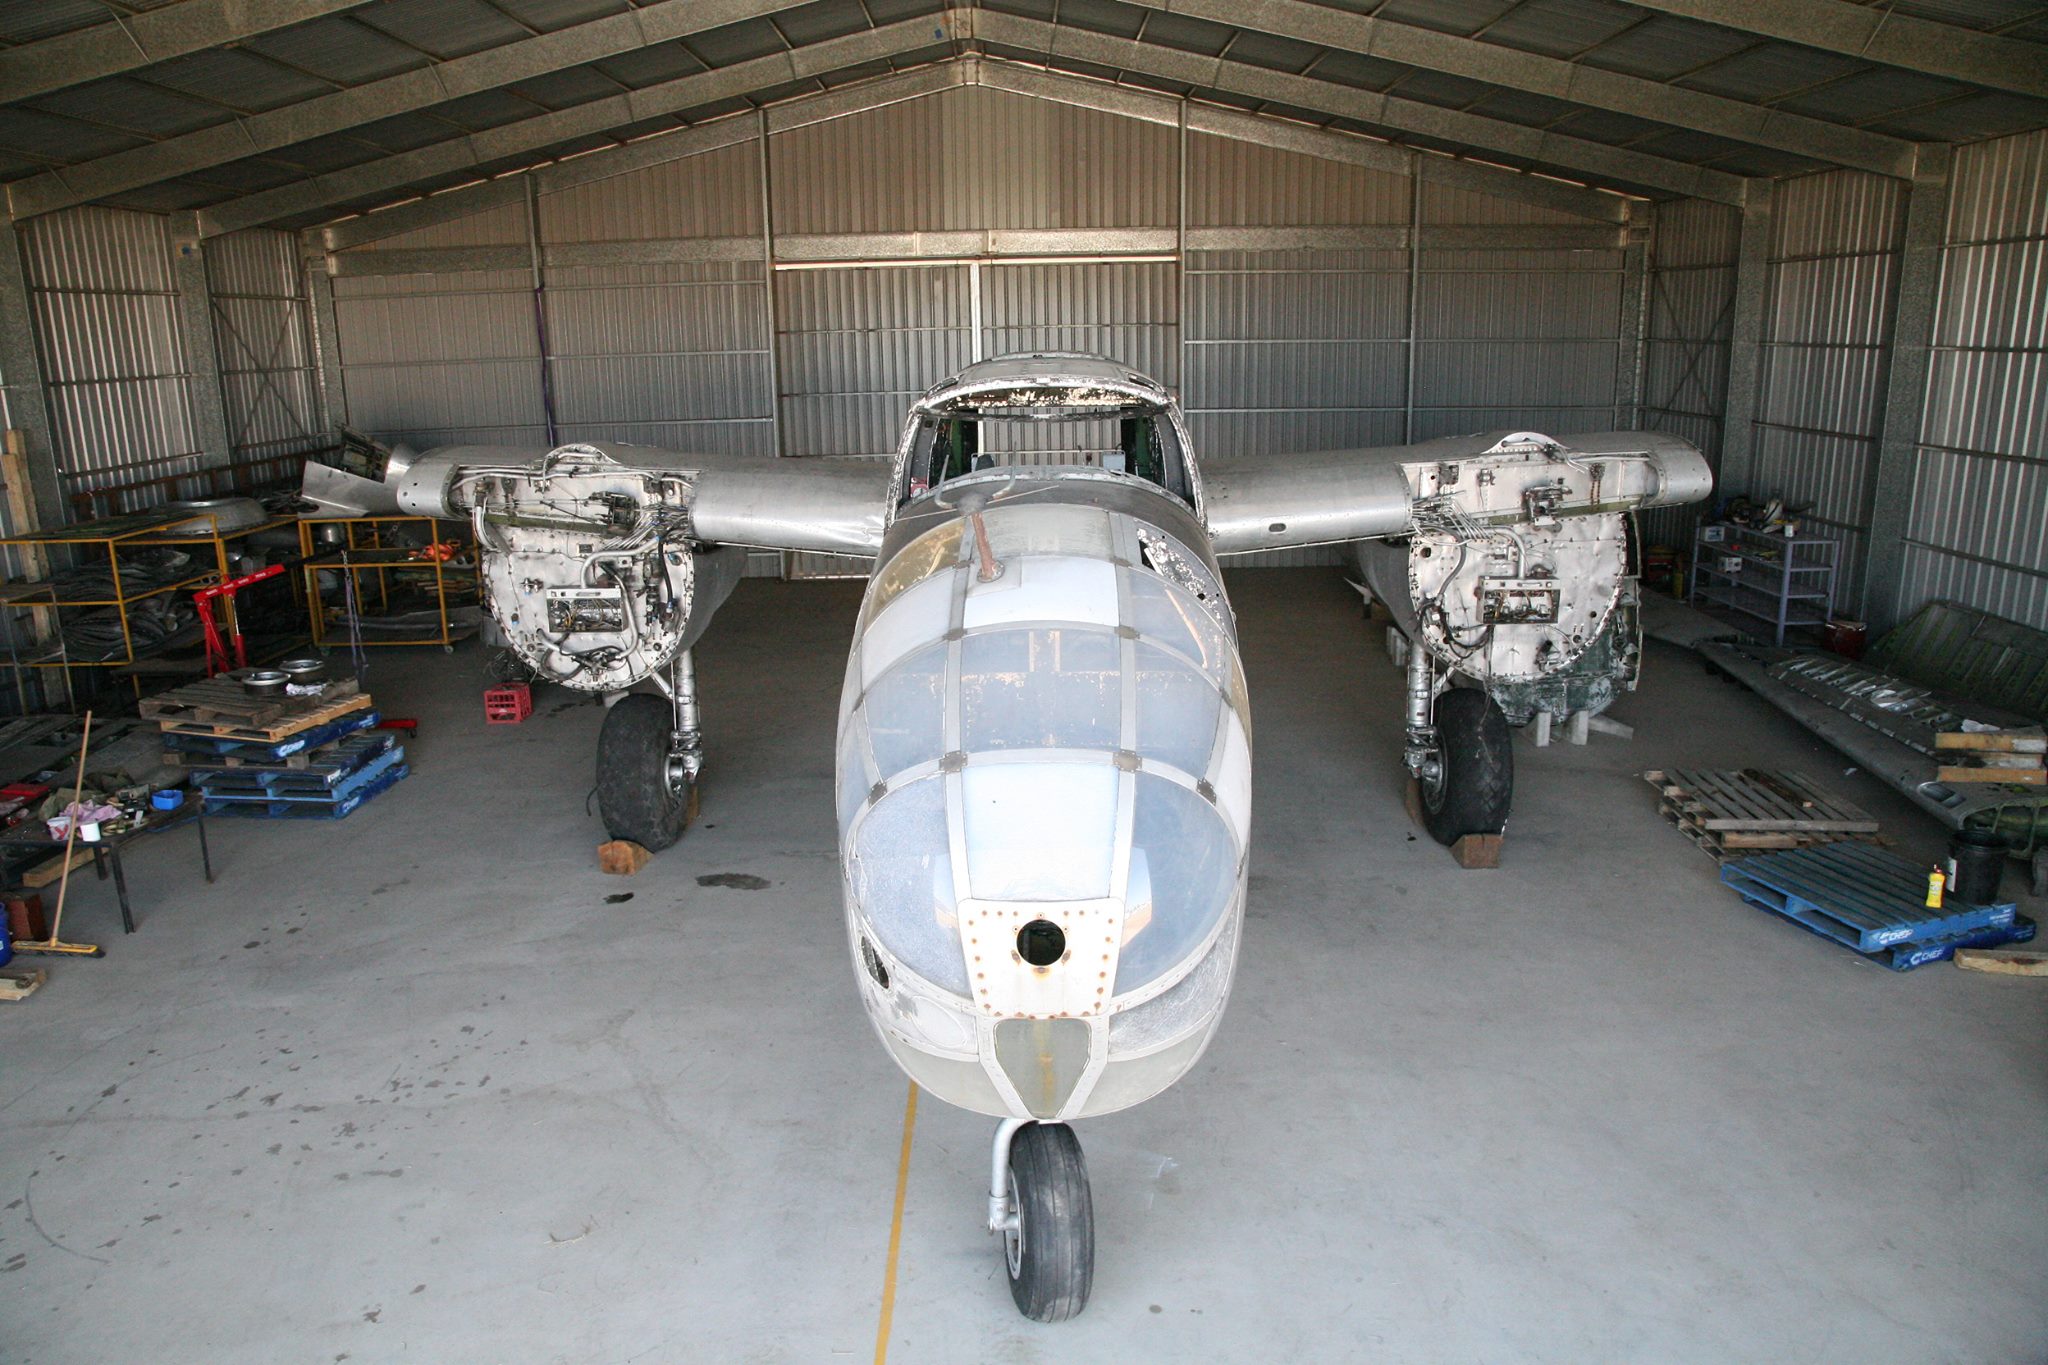 Reevers' B-25J before the real restoration work commenced. (photo via Reevers)